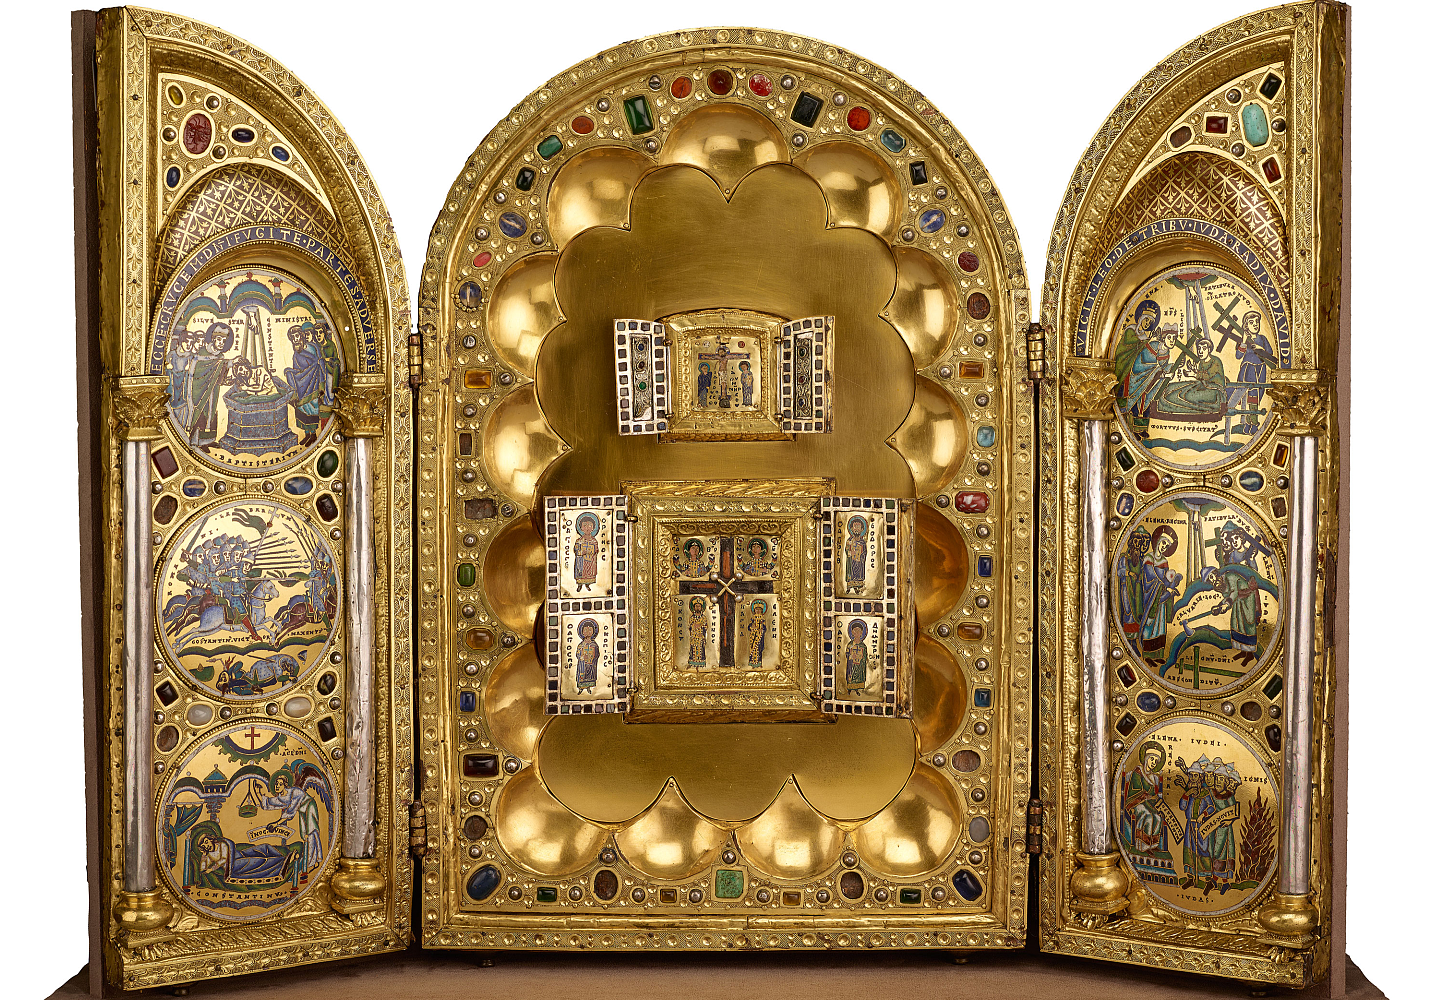 Treasures from the Permanent Collection: An Interactive Spotlight Tour